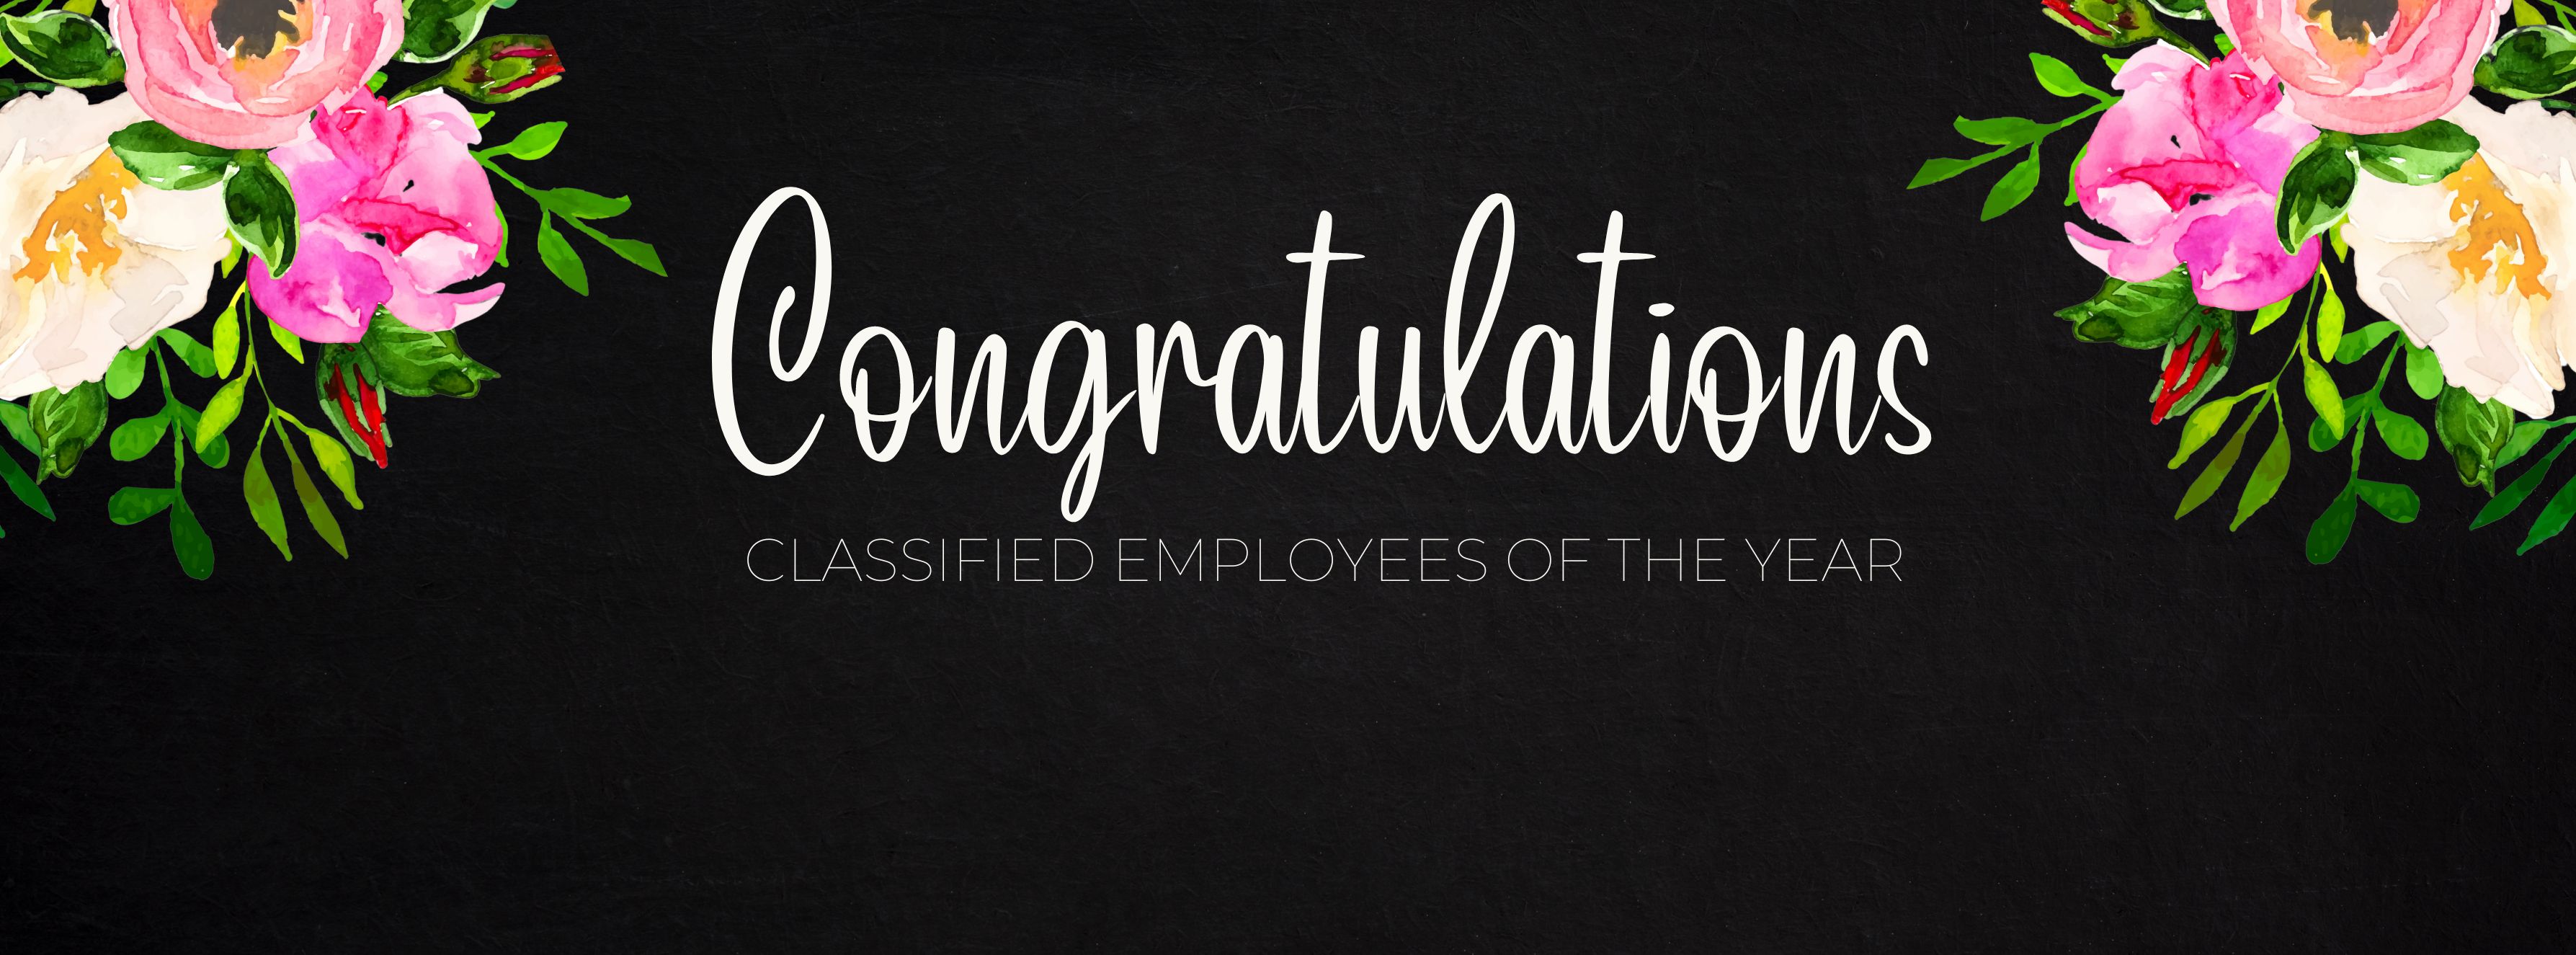 Classified School Employees of the Year Announced